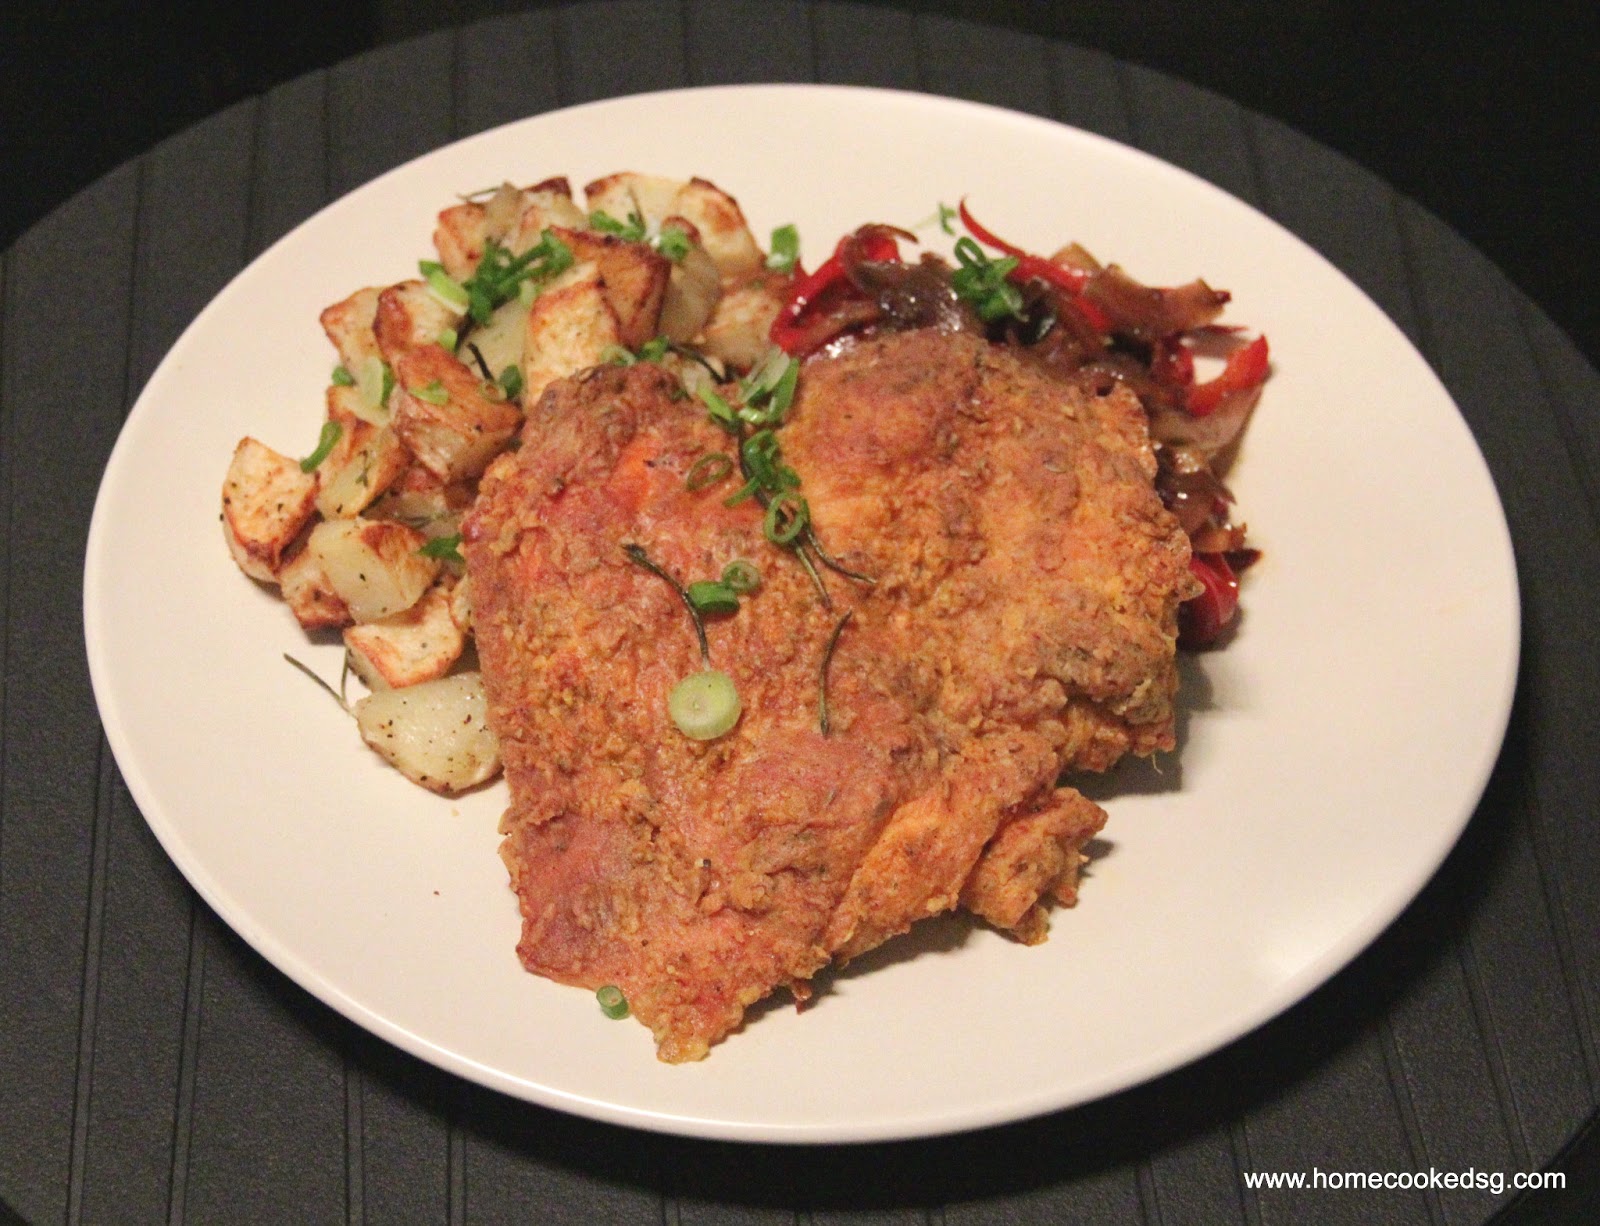 Home Cooked SG: Oven Baked Breaded Chicken Thigh